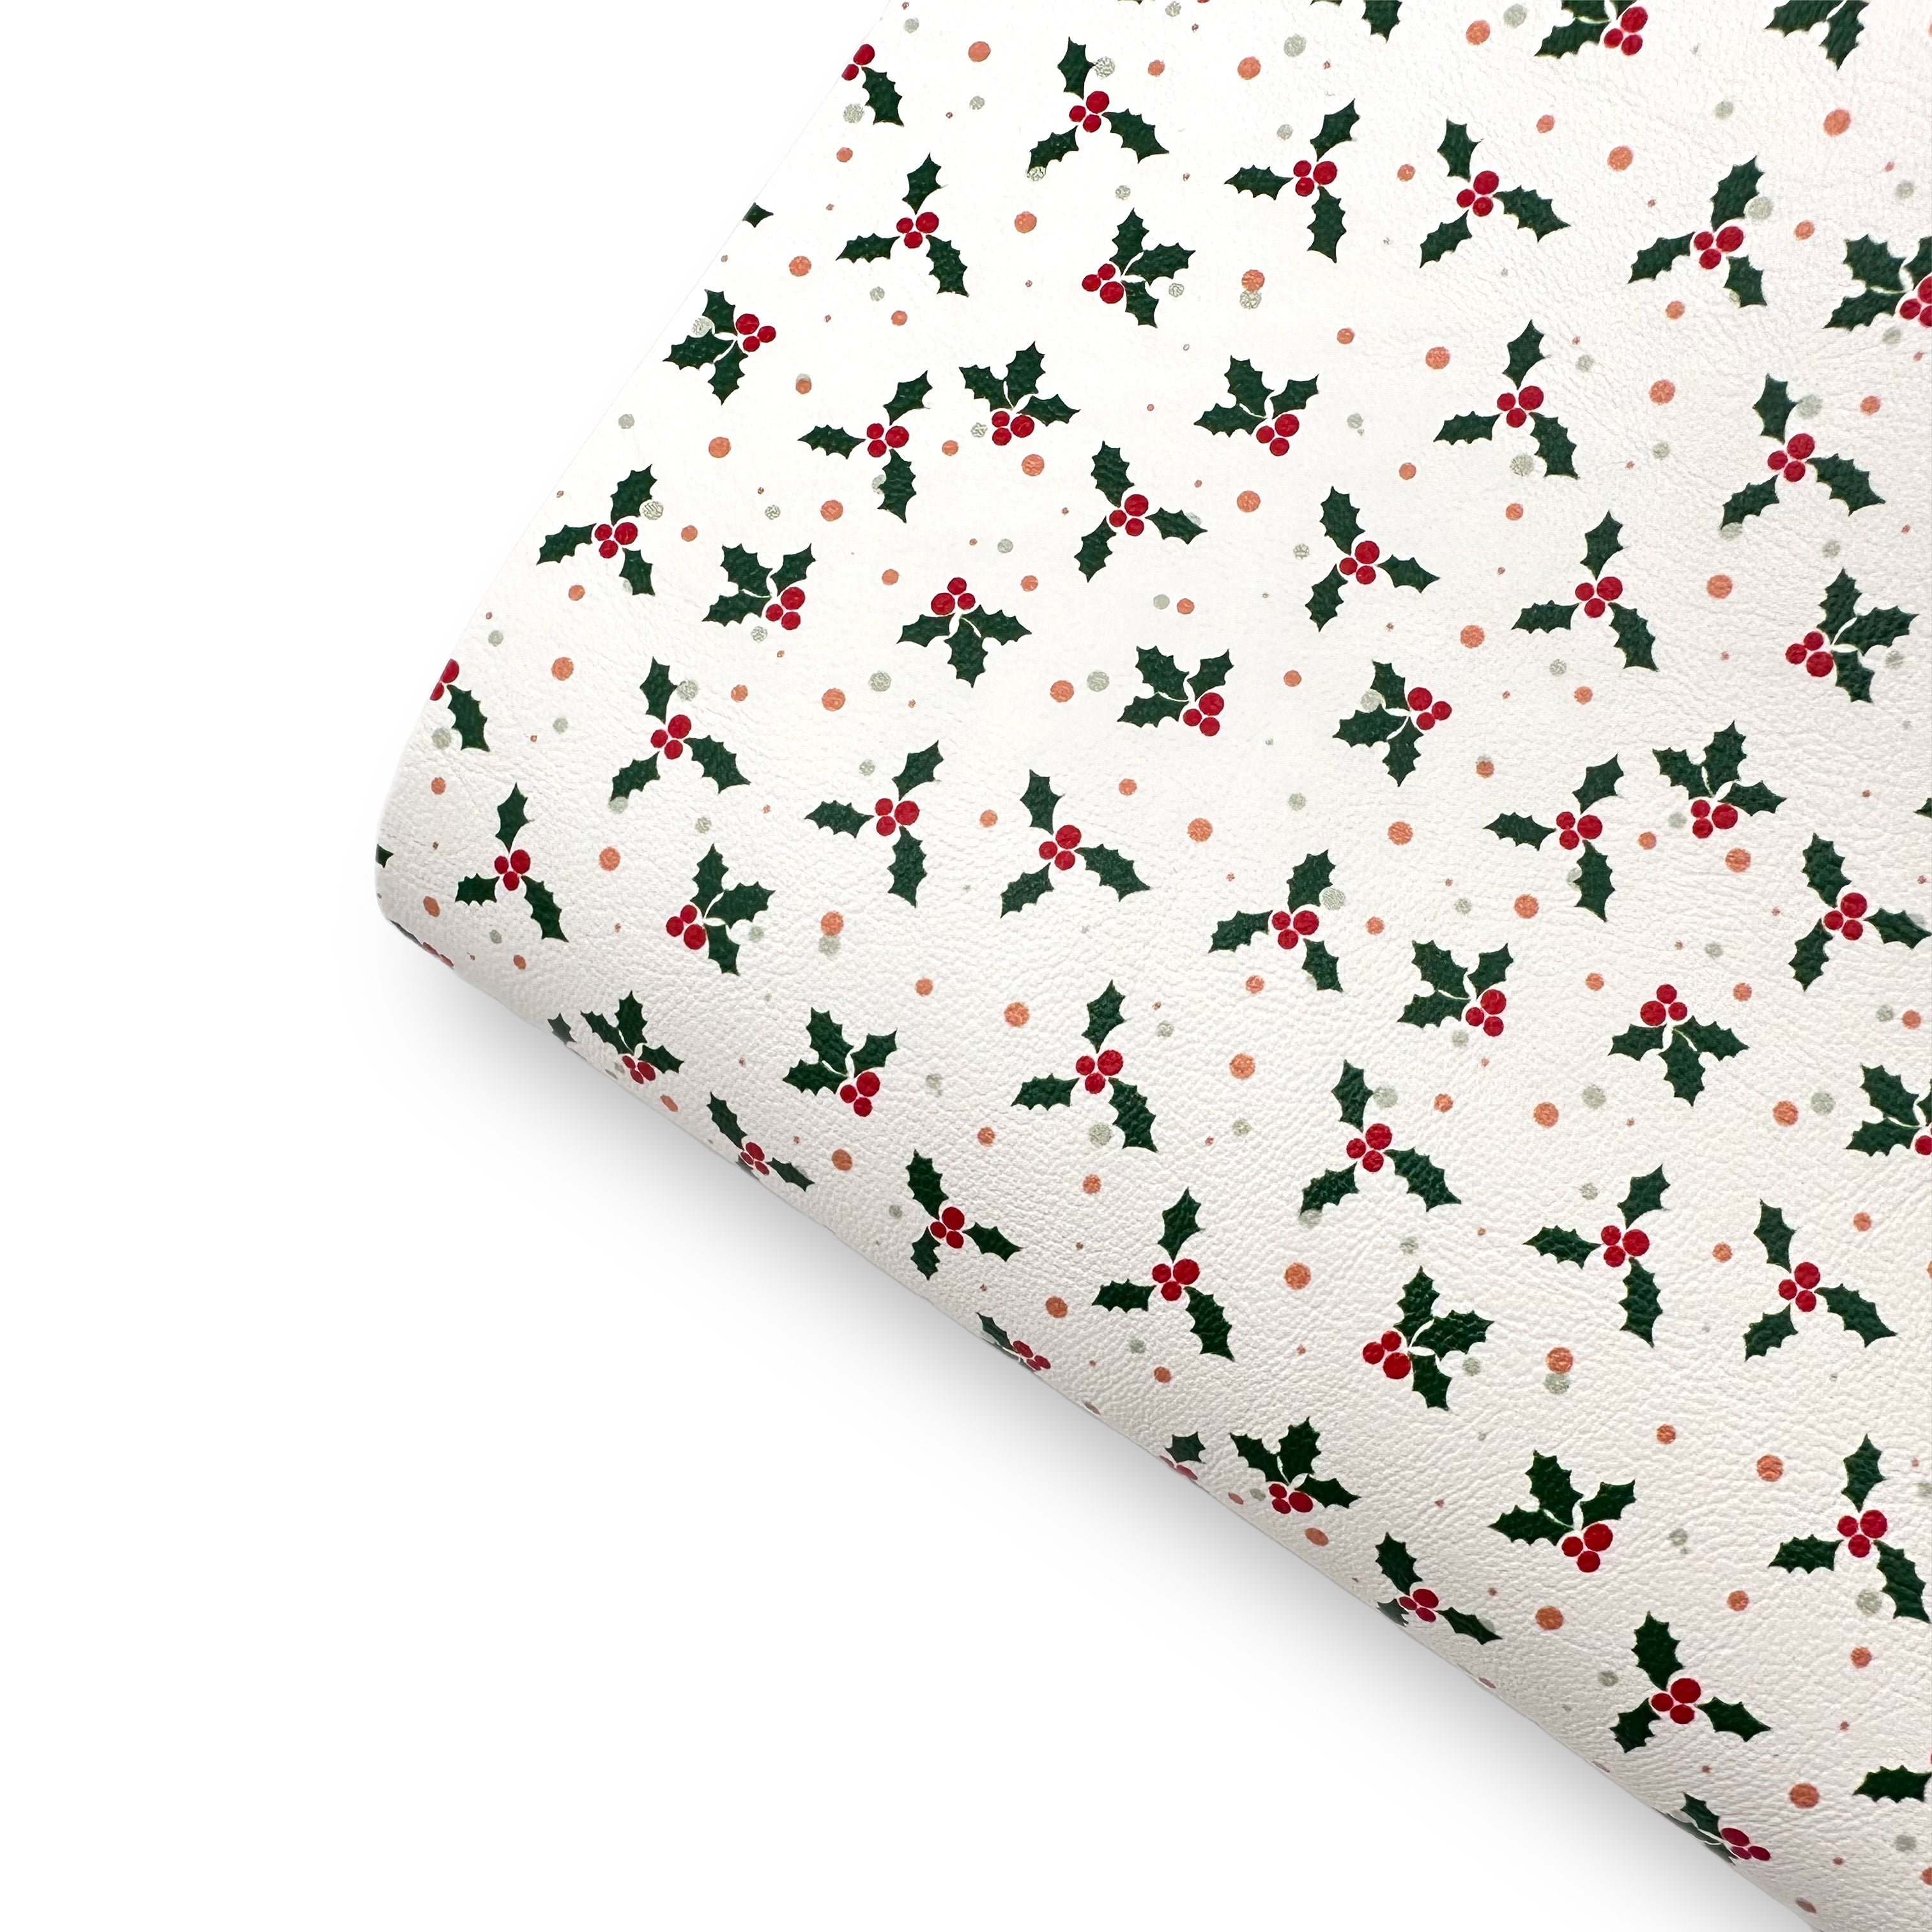 Deck the Halls with boughs of Holly Premium Faux Leather Fabric Sheets